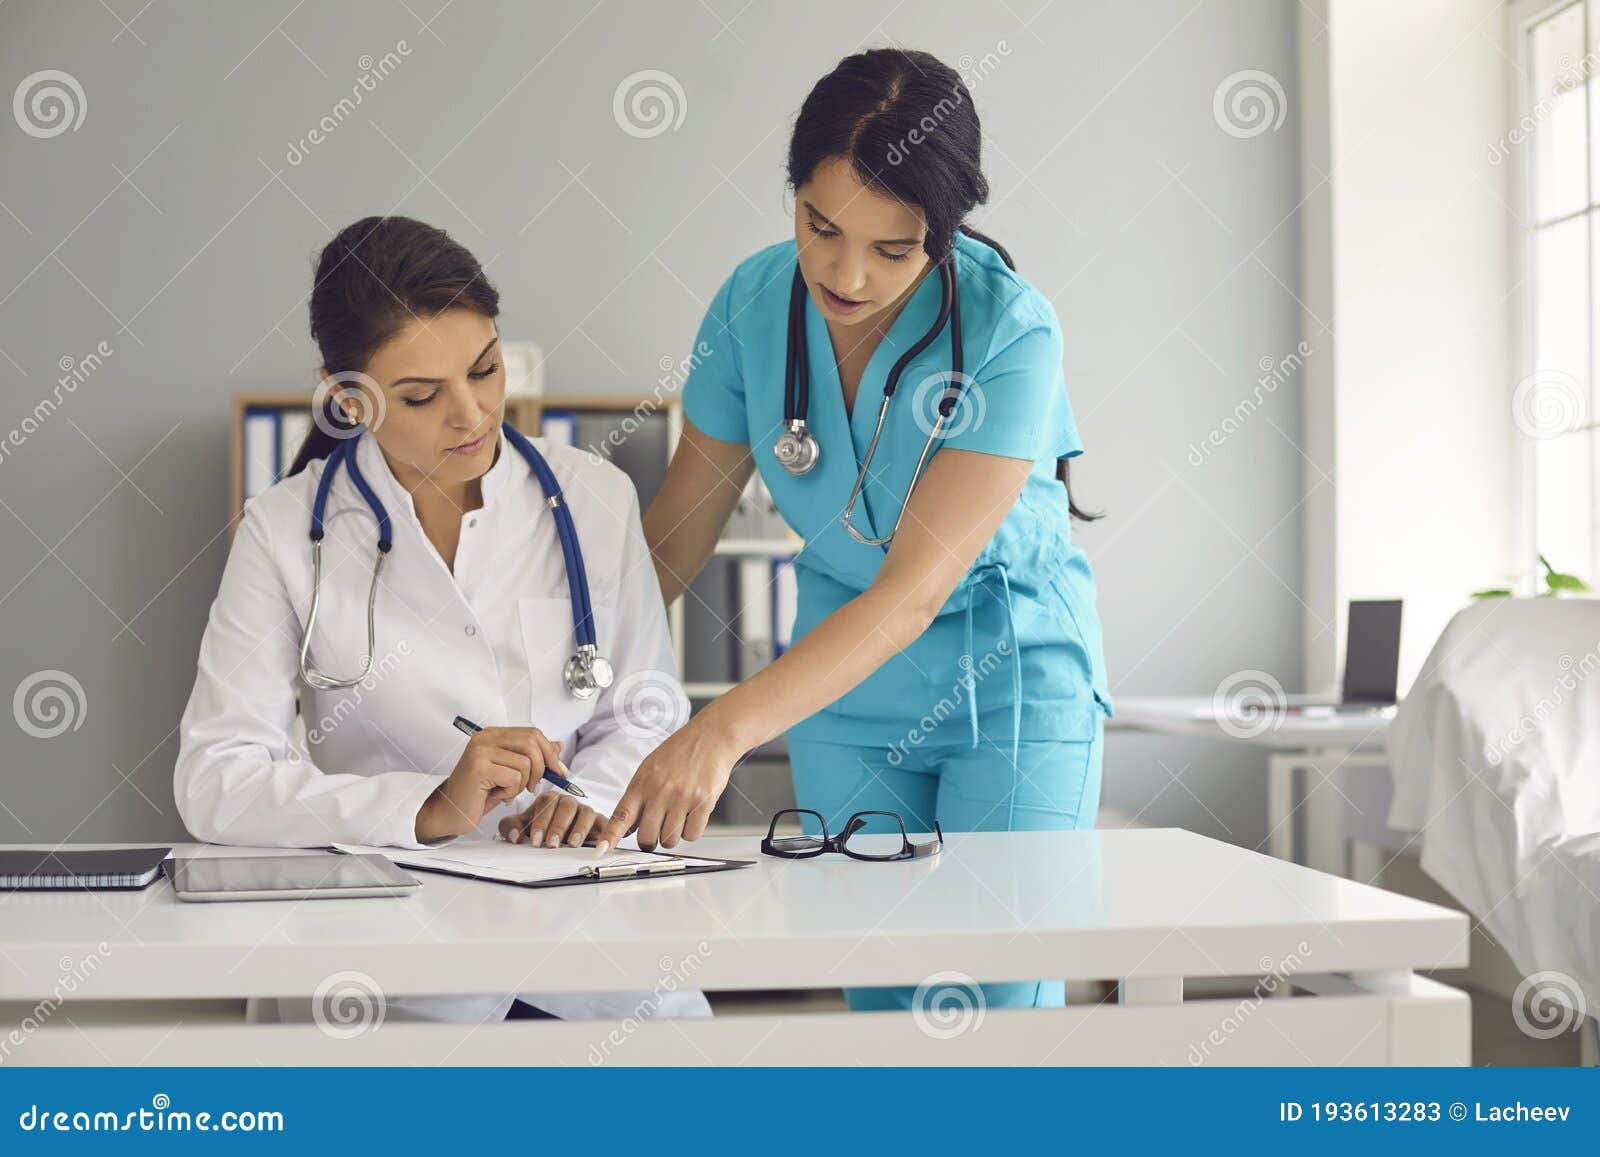 young female doctor and her assistant working together at hospital. physician and nurse with documents at medical office